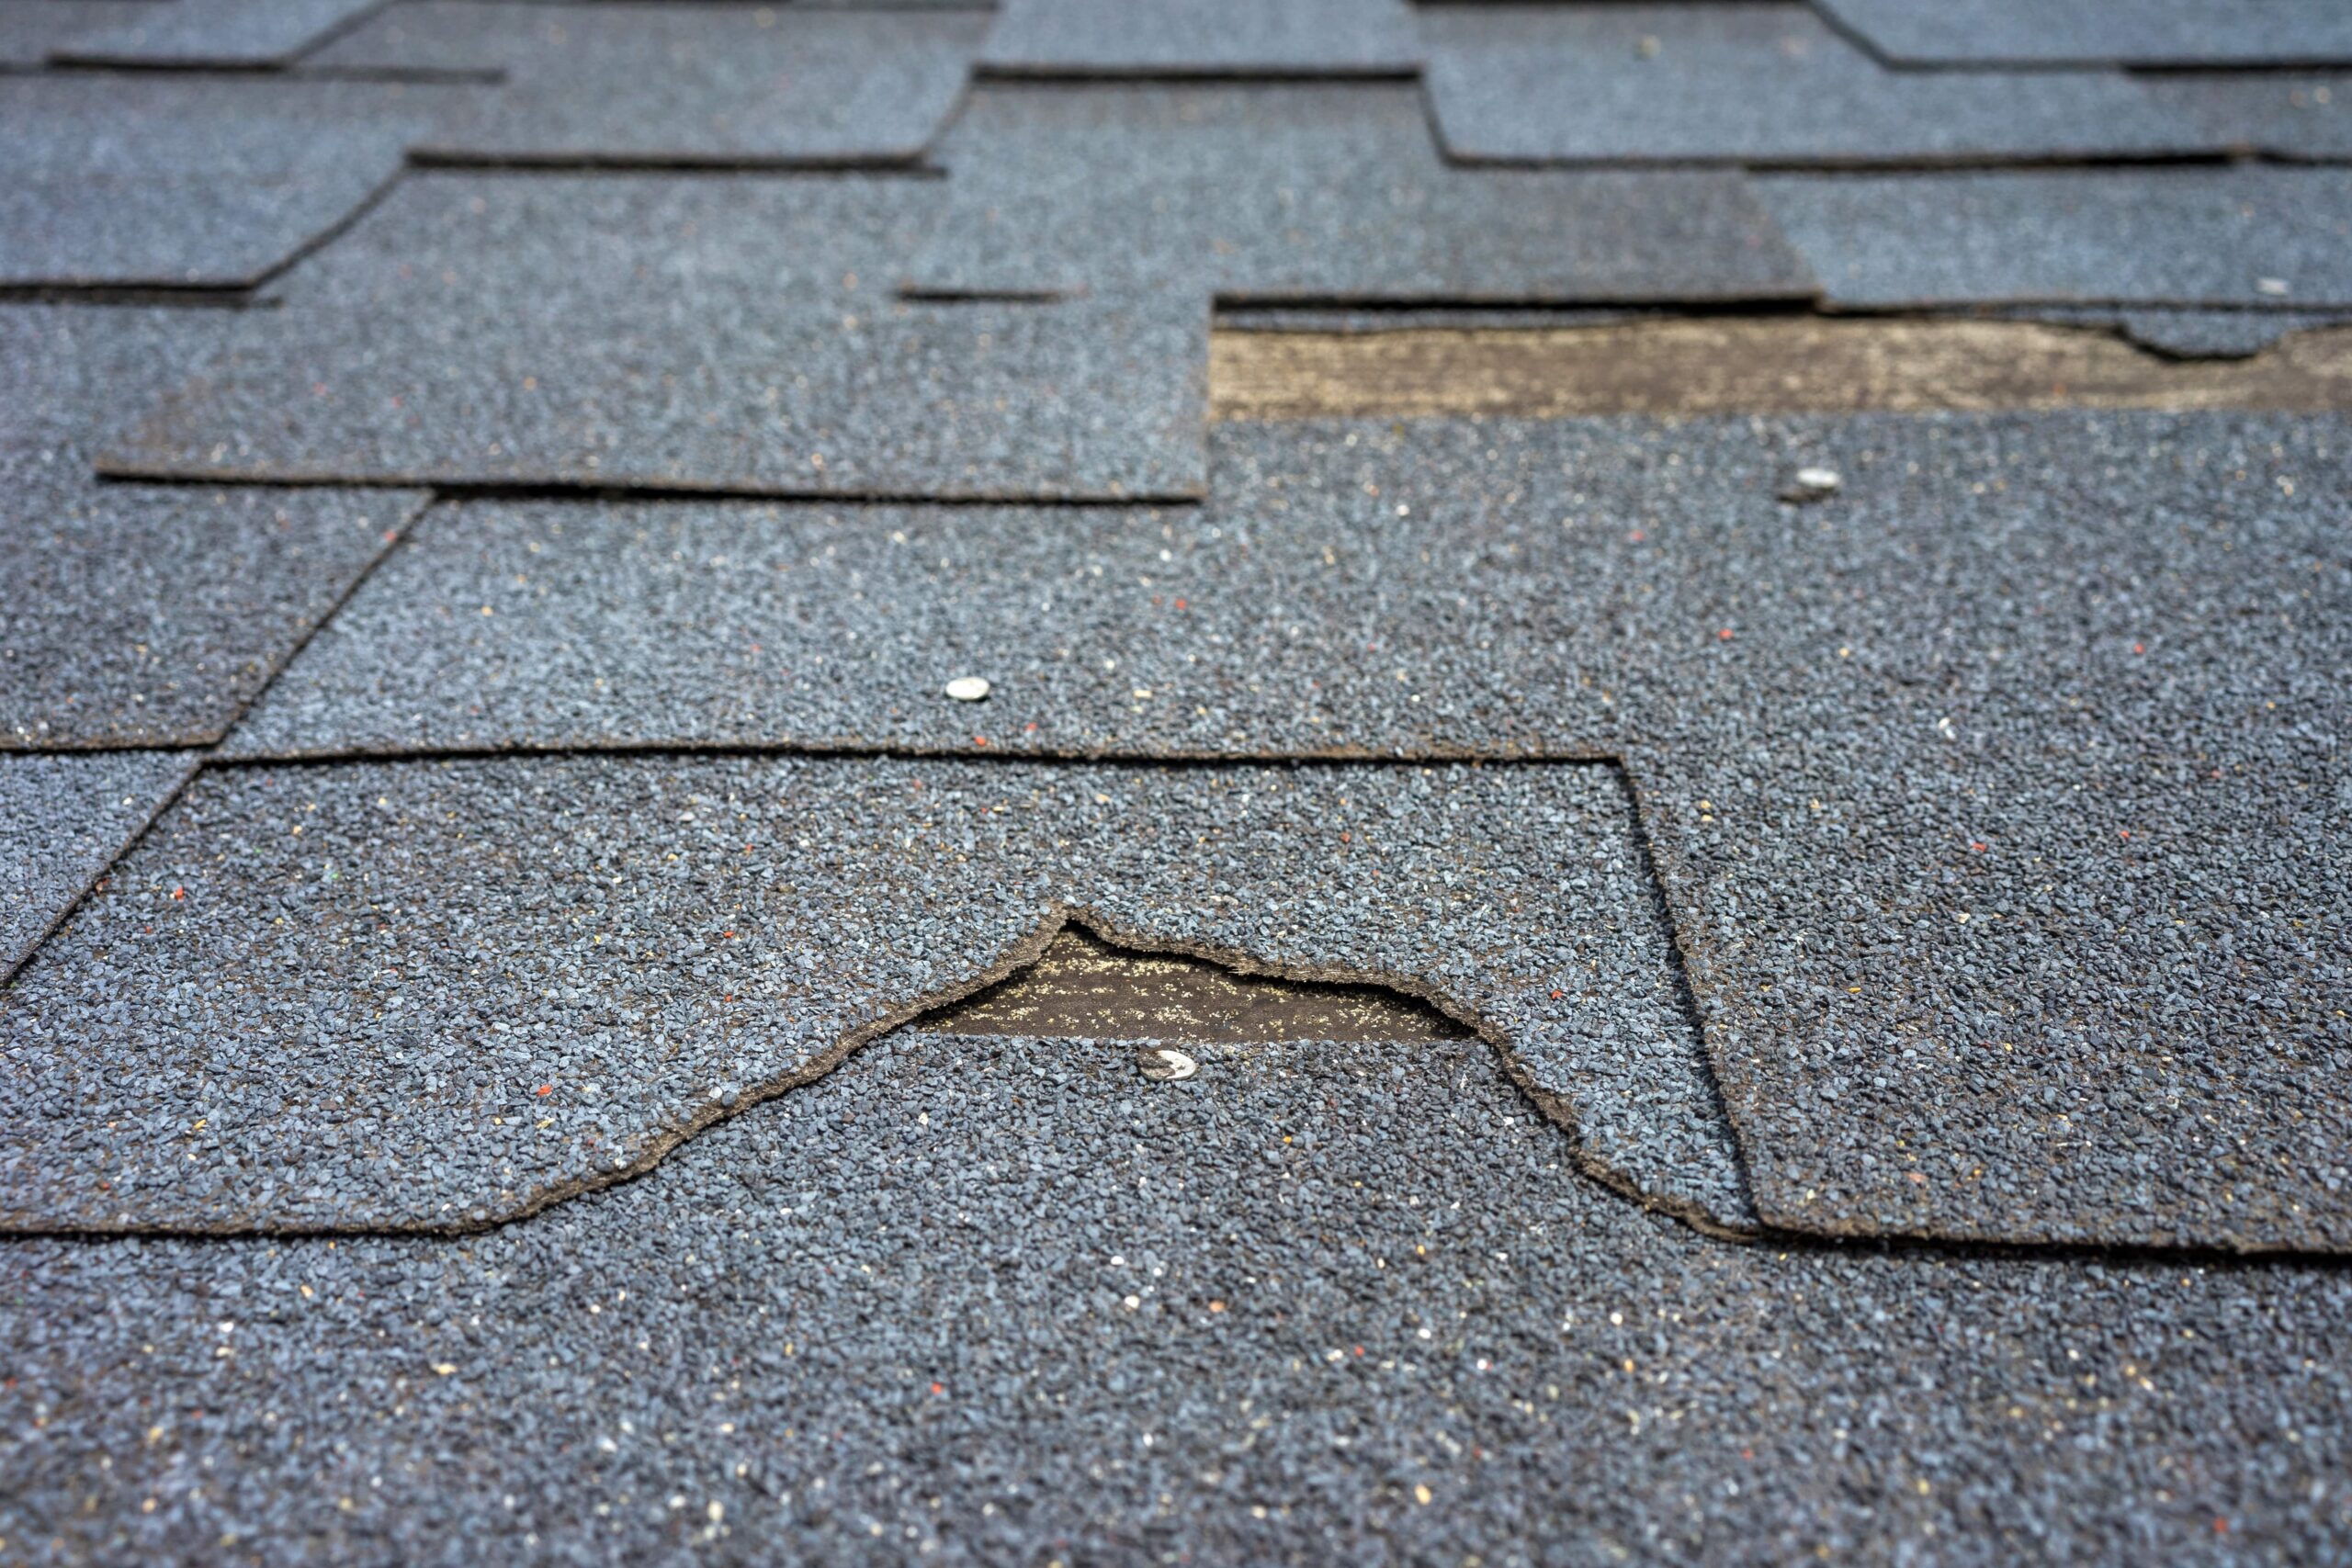 Indicators That You Need A Roof Repair